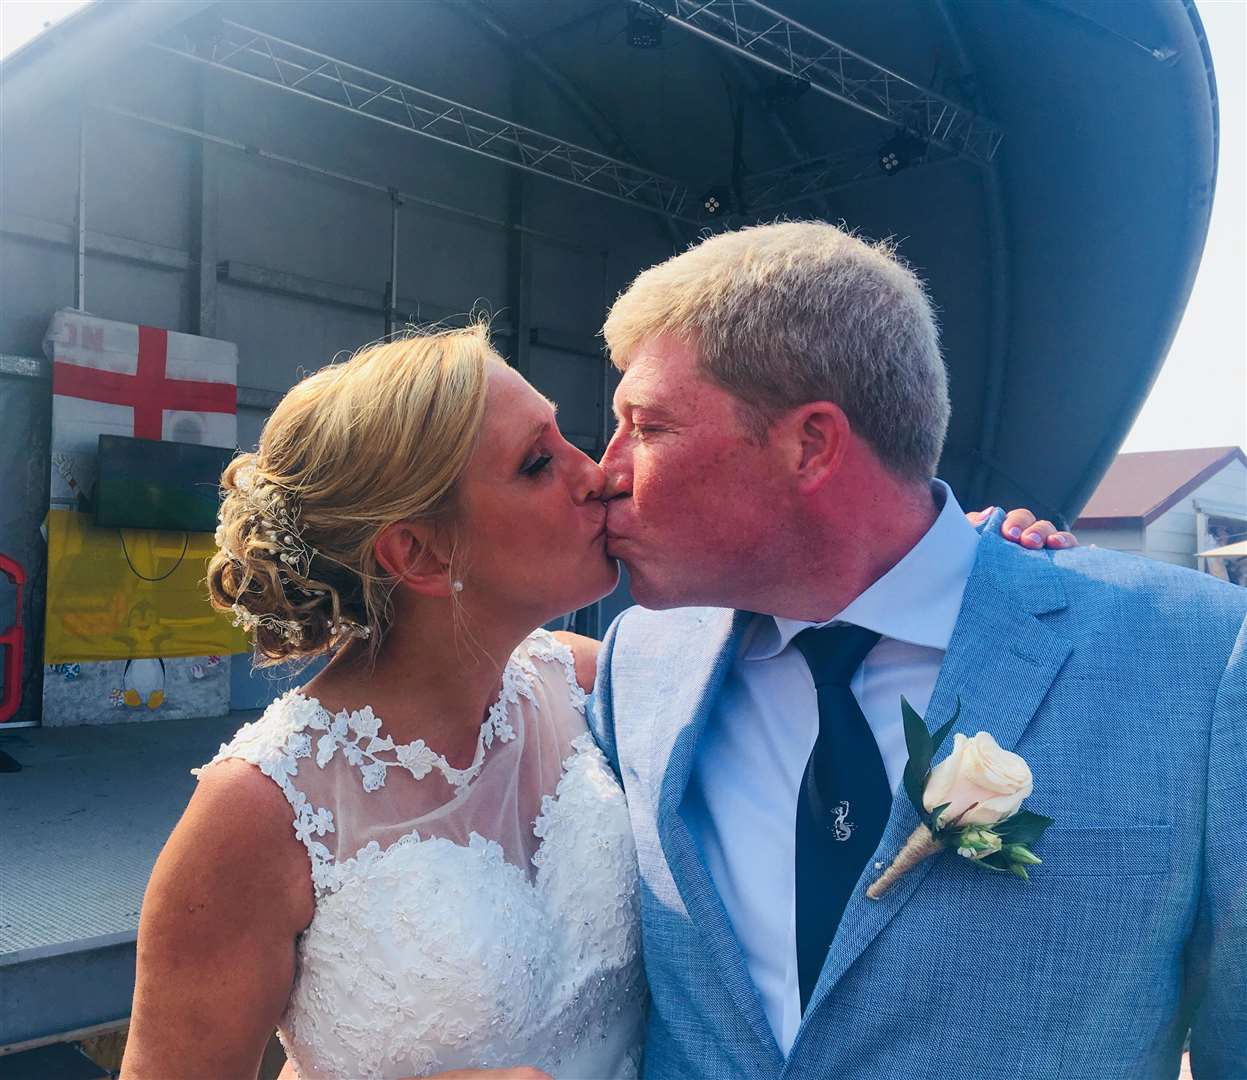 Ingela Hansson and Kieran McSweeney, whose wedding coincided with the World Cup match between England and Sweden (2928904)